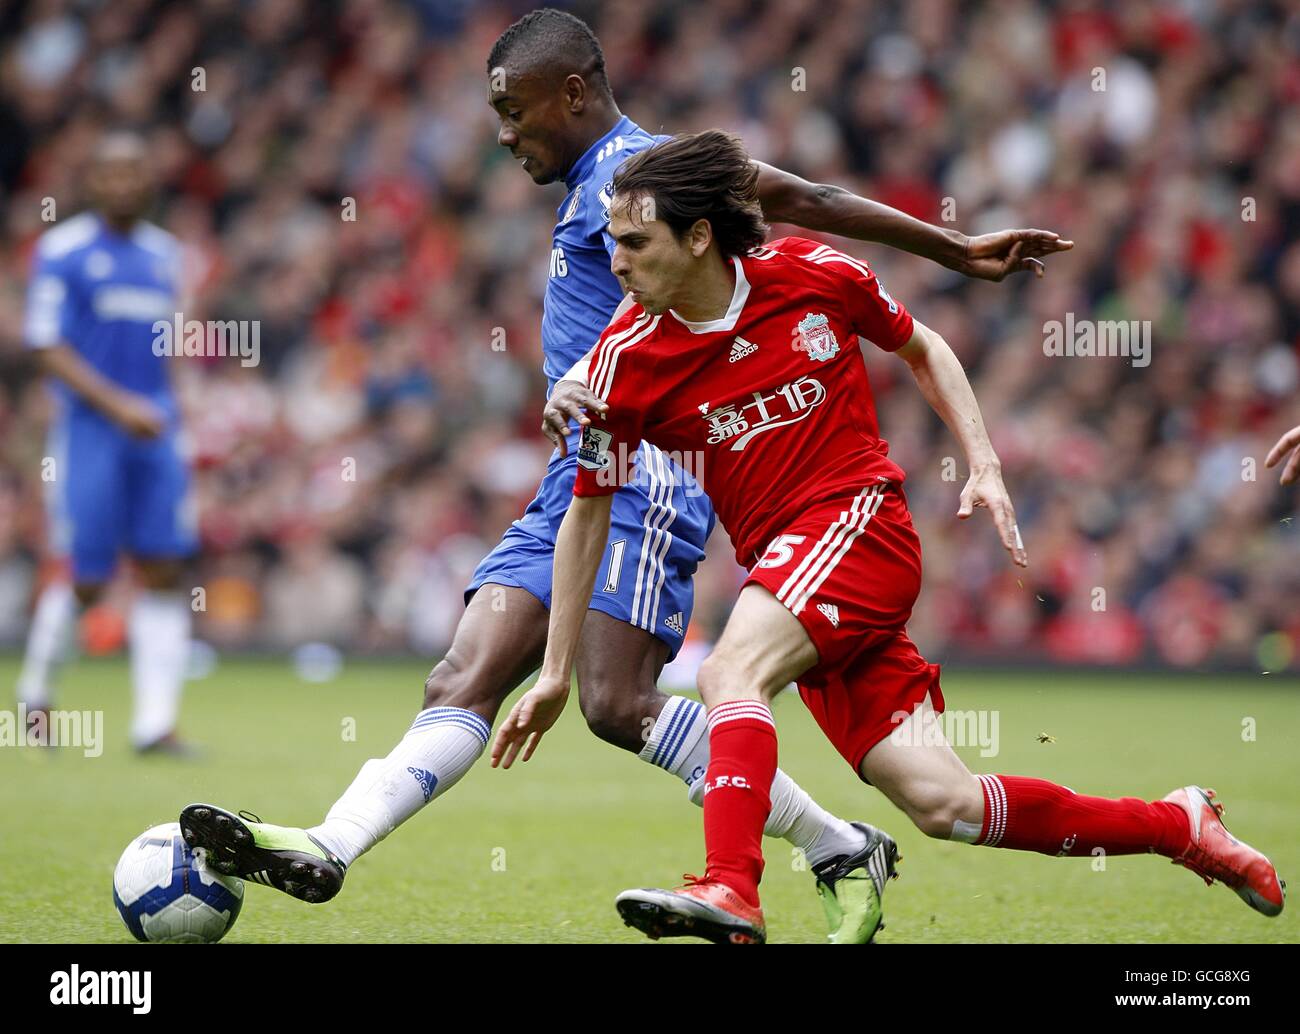 Soccer - Barclays Premier League - Liverpool v Chelsea - Anfield. Chelsea's Salomon Kalou (left) and Liverpool's Yossi Benayoun (right) battle for the ball Stock Photo